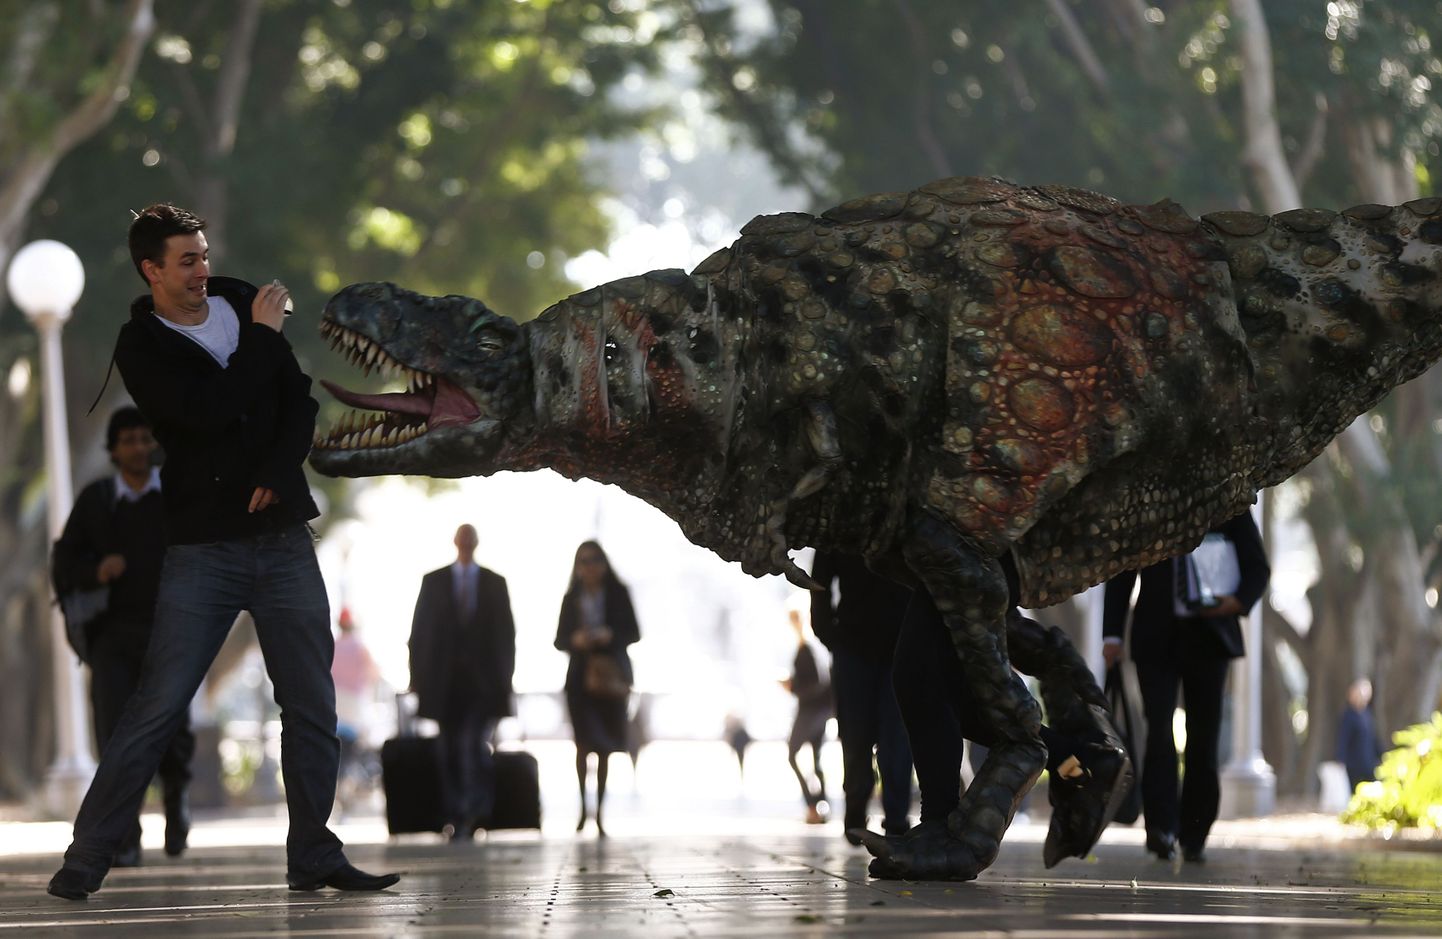 A man reacts as a performer dressed in a Tyrannosaurus rex dinosaur costume walks next to him during a publicity event in central Sydney August 28, 2013. The performance was a promotion for an upcoming exhibition at the Australian Museum titled "Tyrannosaurs - Meet the Family" which showcases ancestors of the Tyrannosaurus rex, with more than 10 life-size dinosaur specimens on display.   REUTERS/Daniel Munoz   (AUSTRALIA - Tags: SOCIETY TPX IMAGES OF THE DAY)